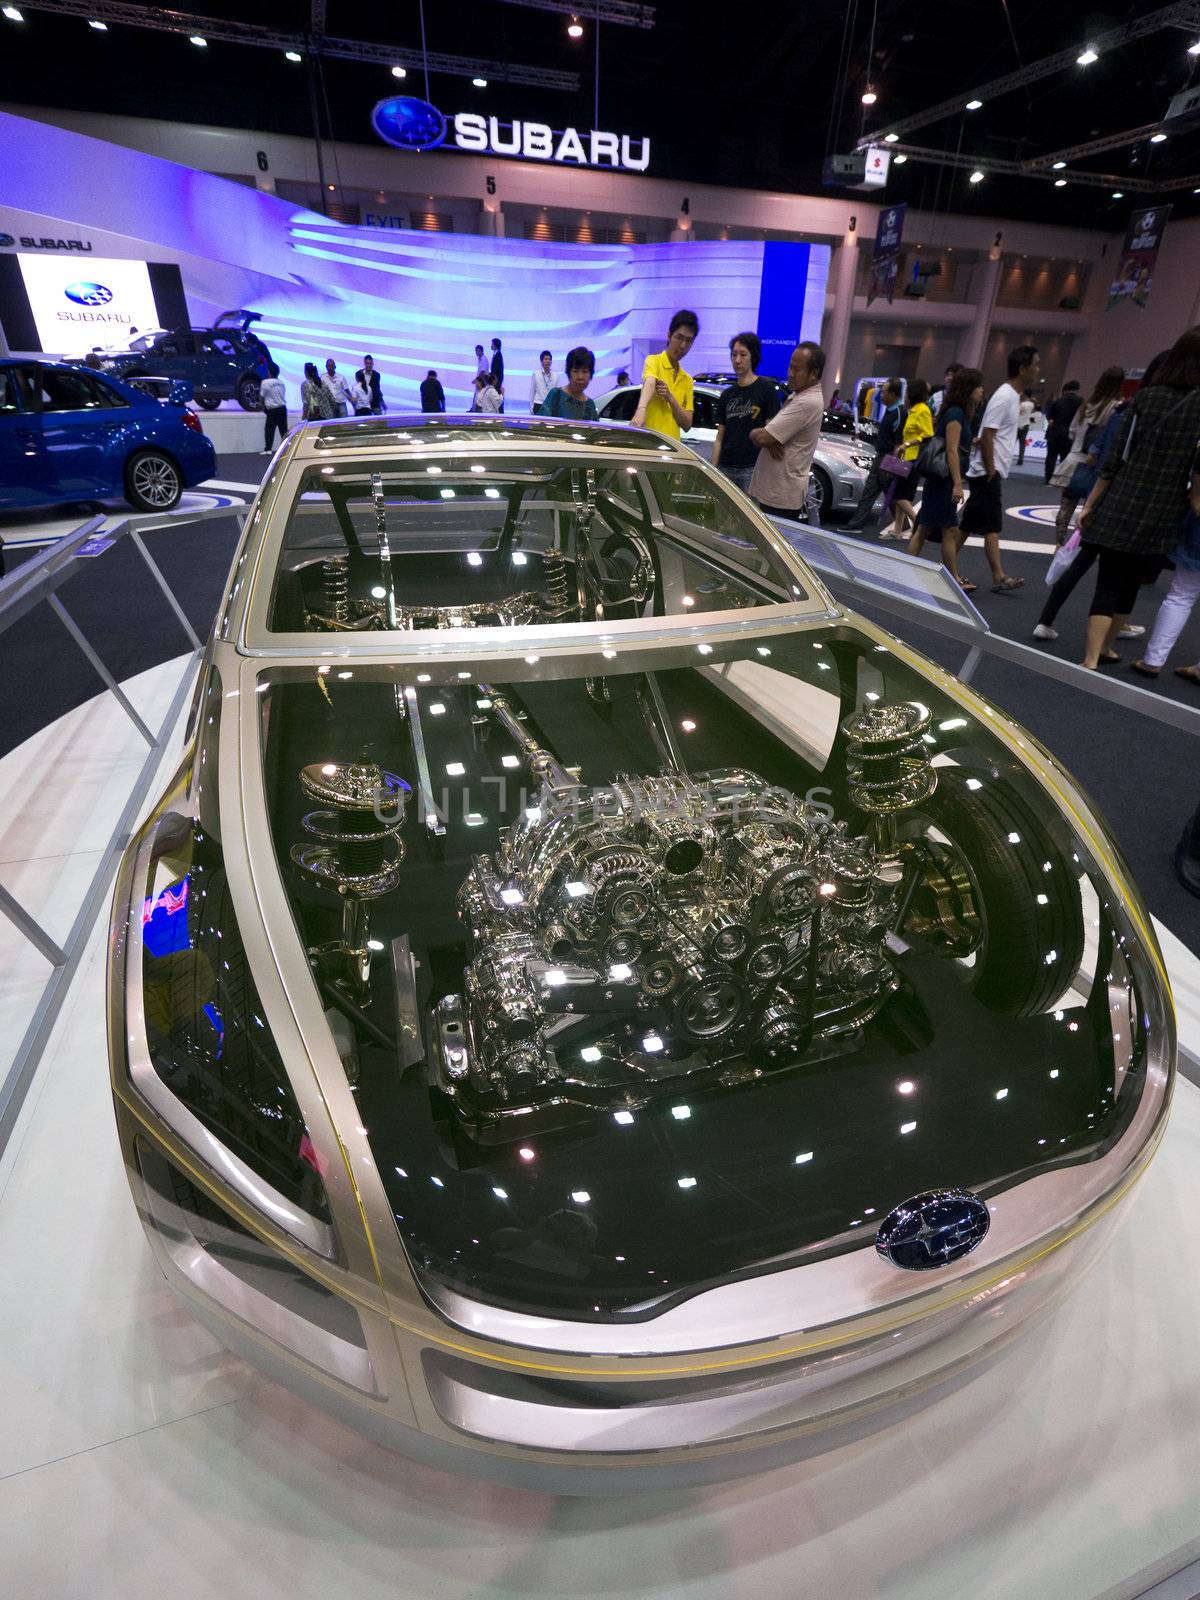 BANGKOK - DECEMBER 4: Subaru shows a transparent version of their BRZ sports car at the annual Motor Expo at Impact Challenger on December 4, 2012 in Bangkok, Thailand.